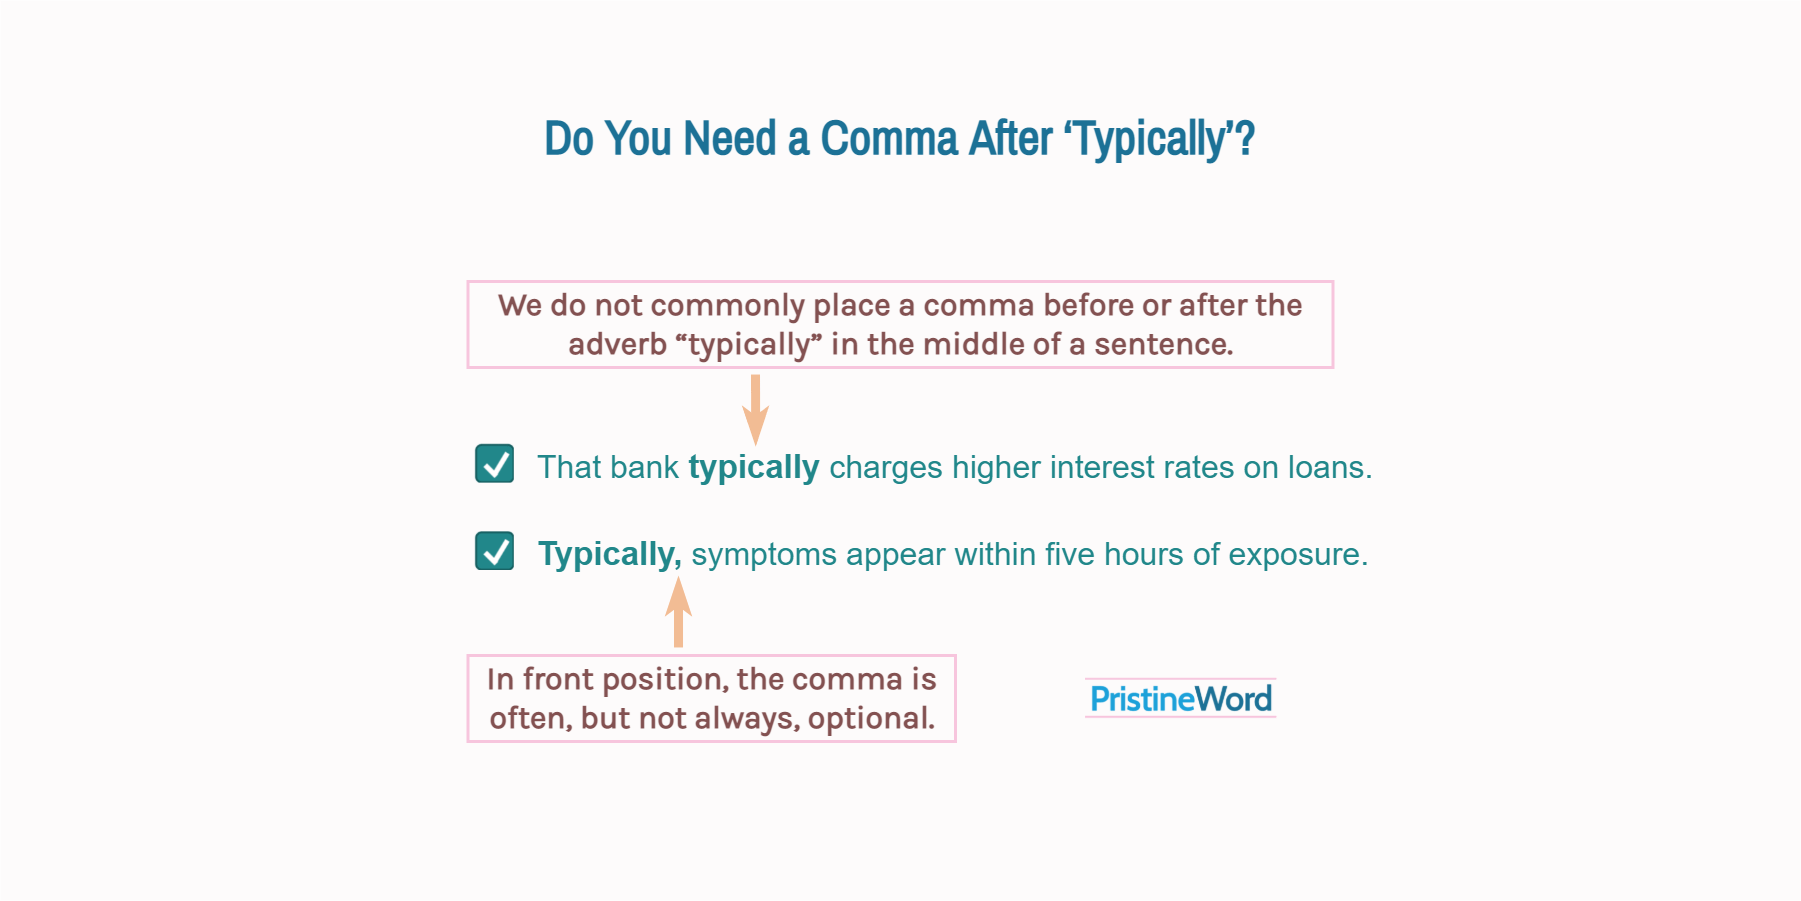 Do You Need a Comma After ‘Typically’?